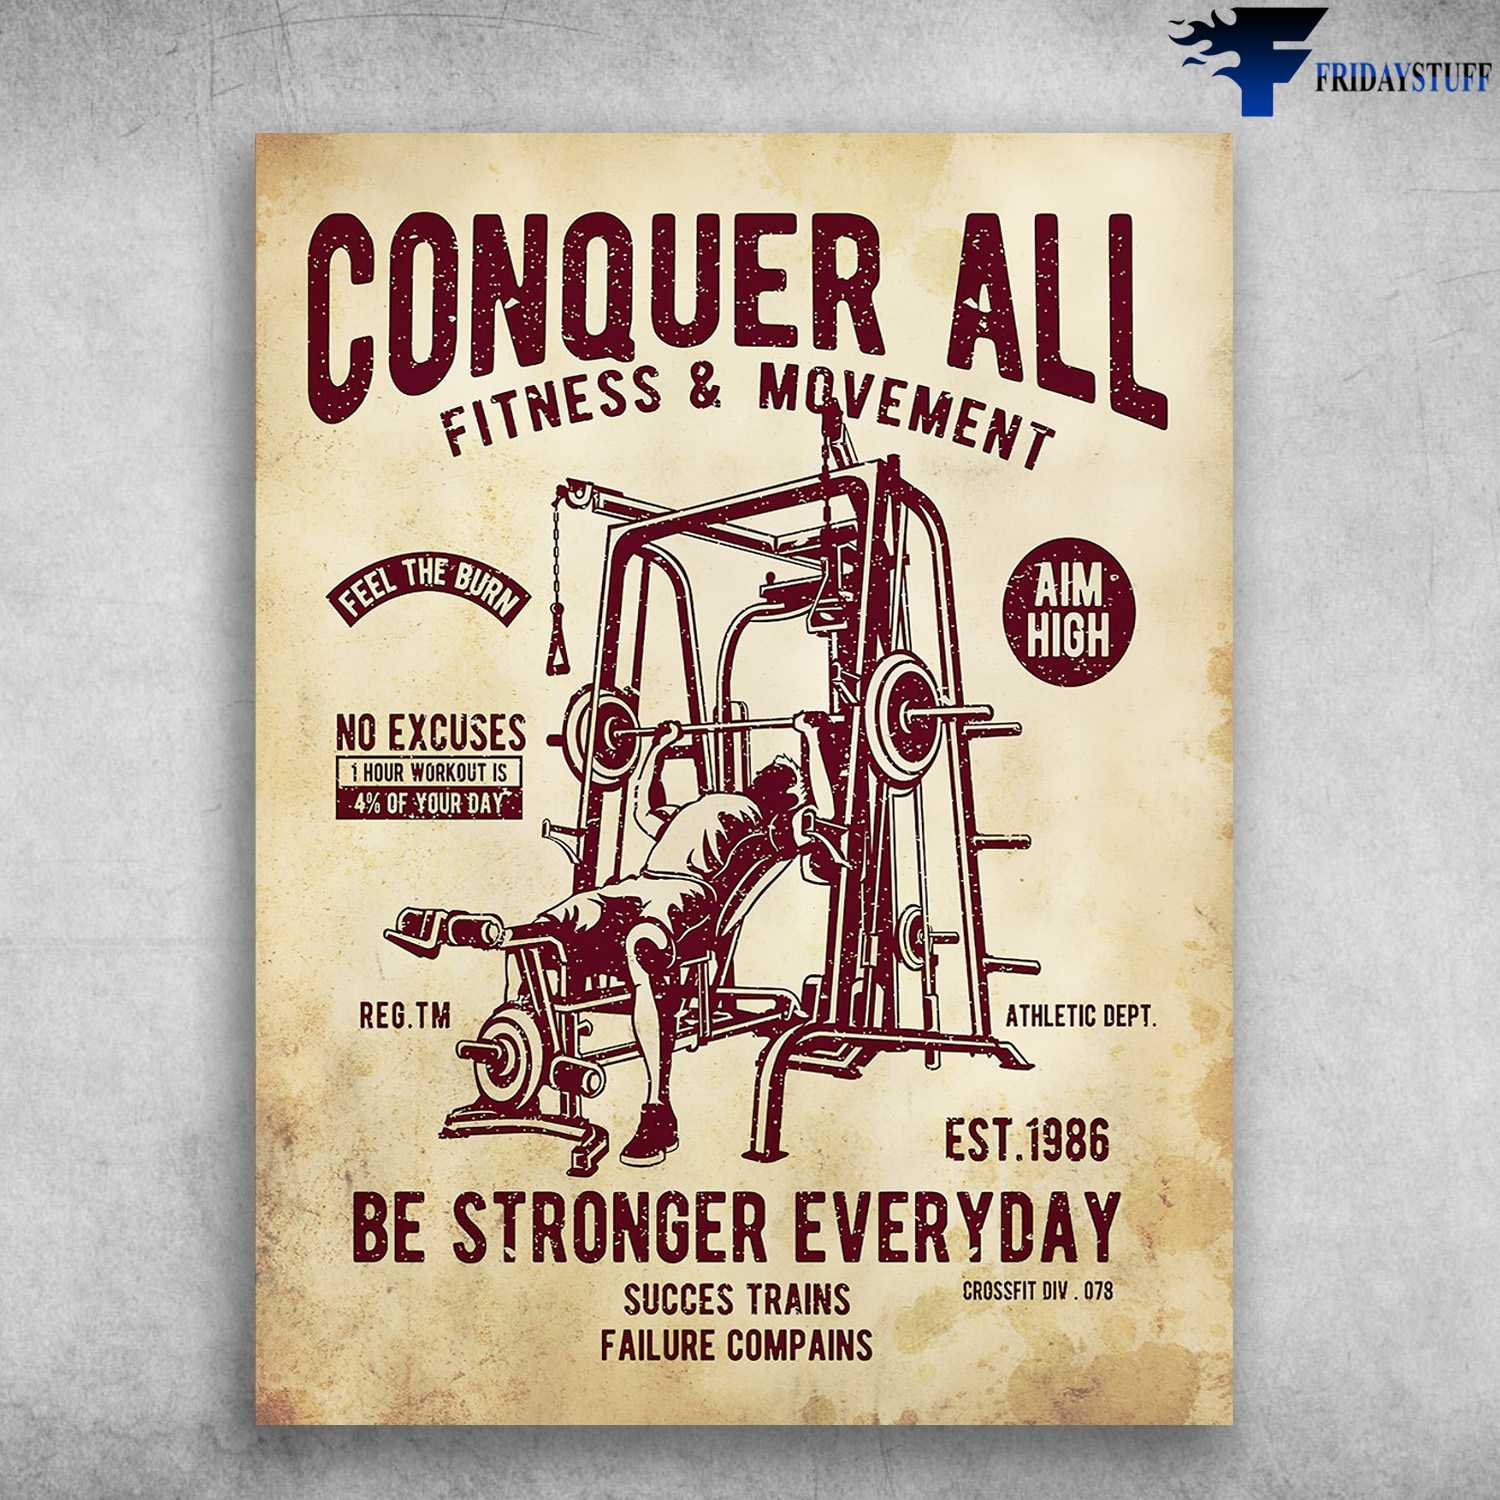 Gym Room, Gym Poster - Conquer All, Fitness And Movement, Feel The Burn, Aim High, No Excuses, Be Stronger Everyday